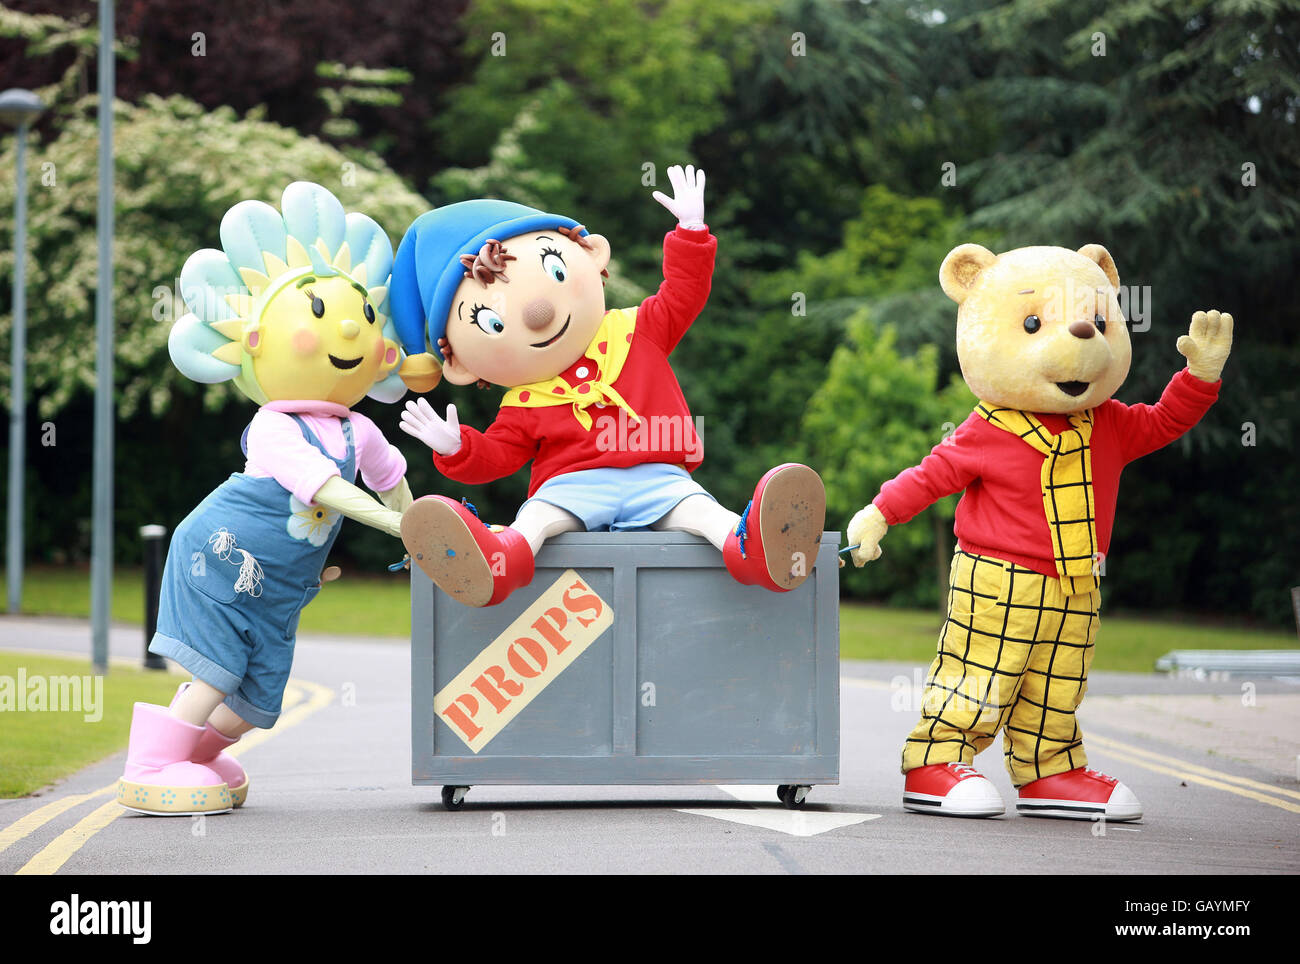 Milkshake tour - Leicester. The Milkshake tour at De Montford Hall in Leicester. (L-R) Fifi, Noddy and Rupert arrive to start the tour. Stock Photo